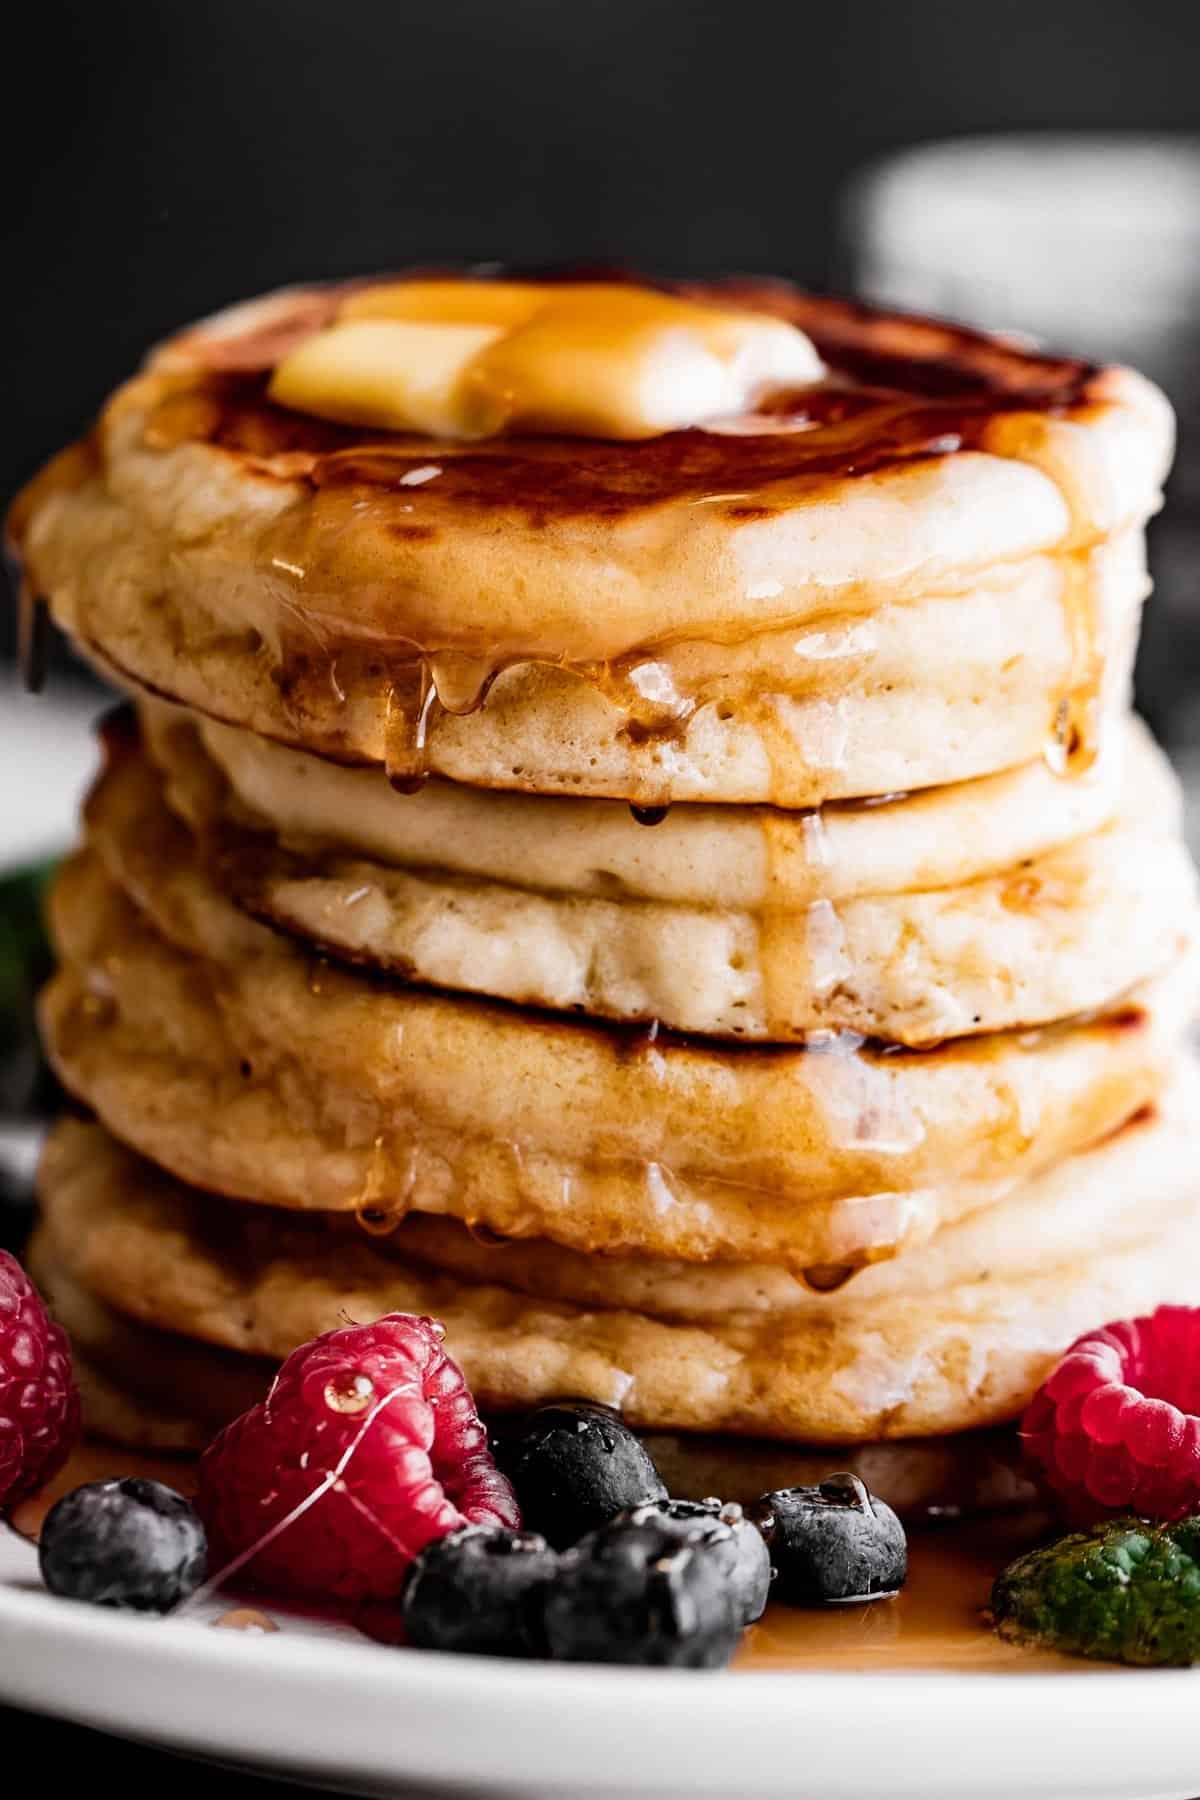 up close shot of a stack of drop scones with a pat of butter on top, drizzling pancake syrup on the sides, and blueberries and raspberries arranged around the scones.